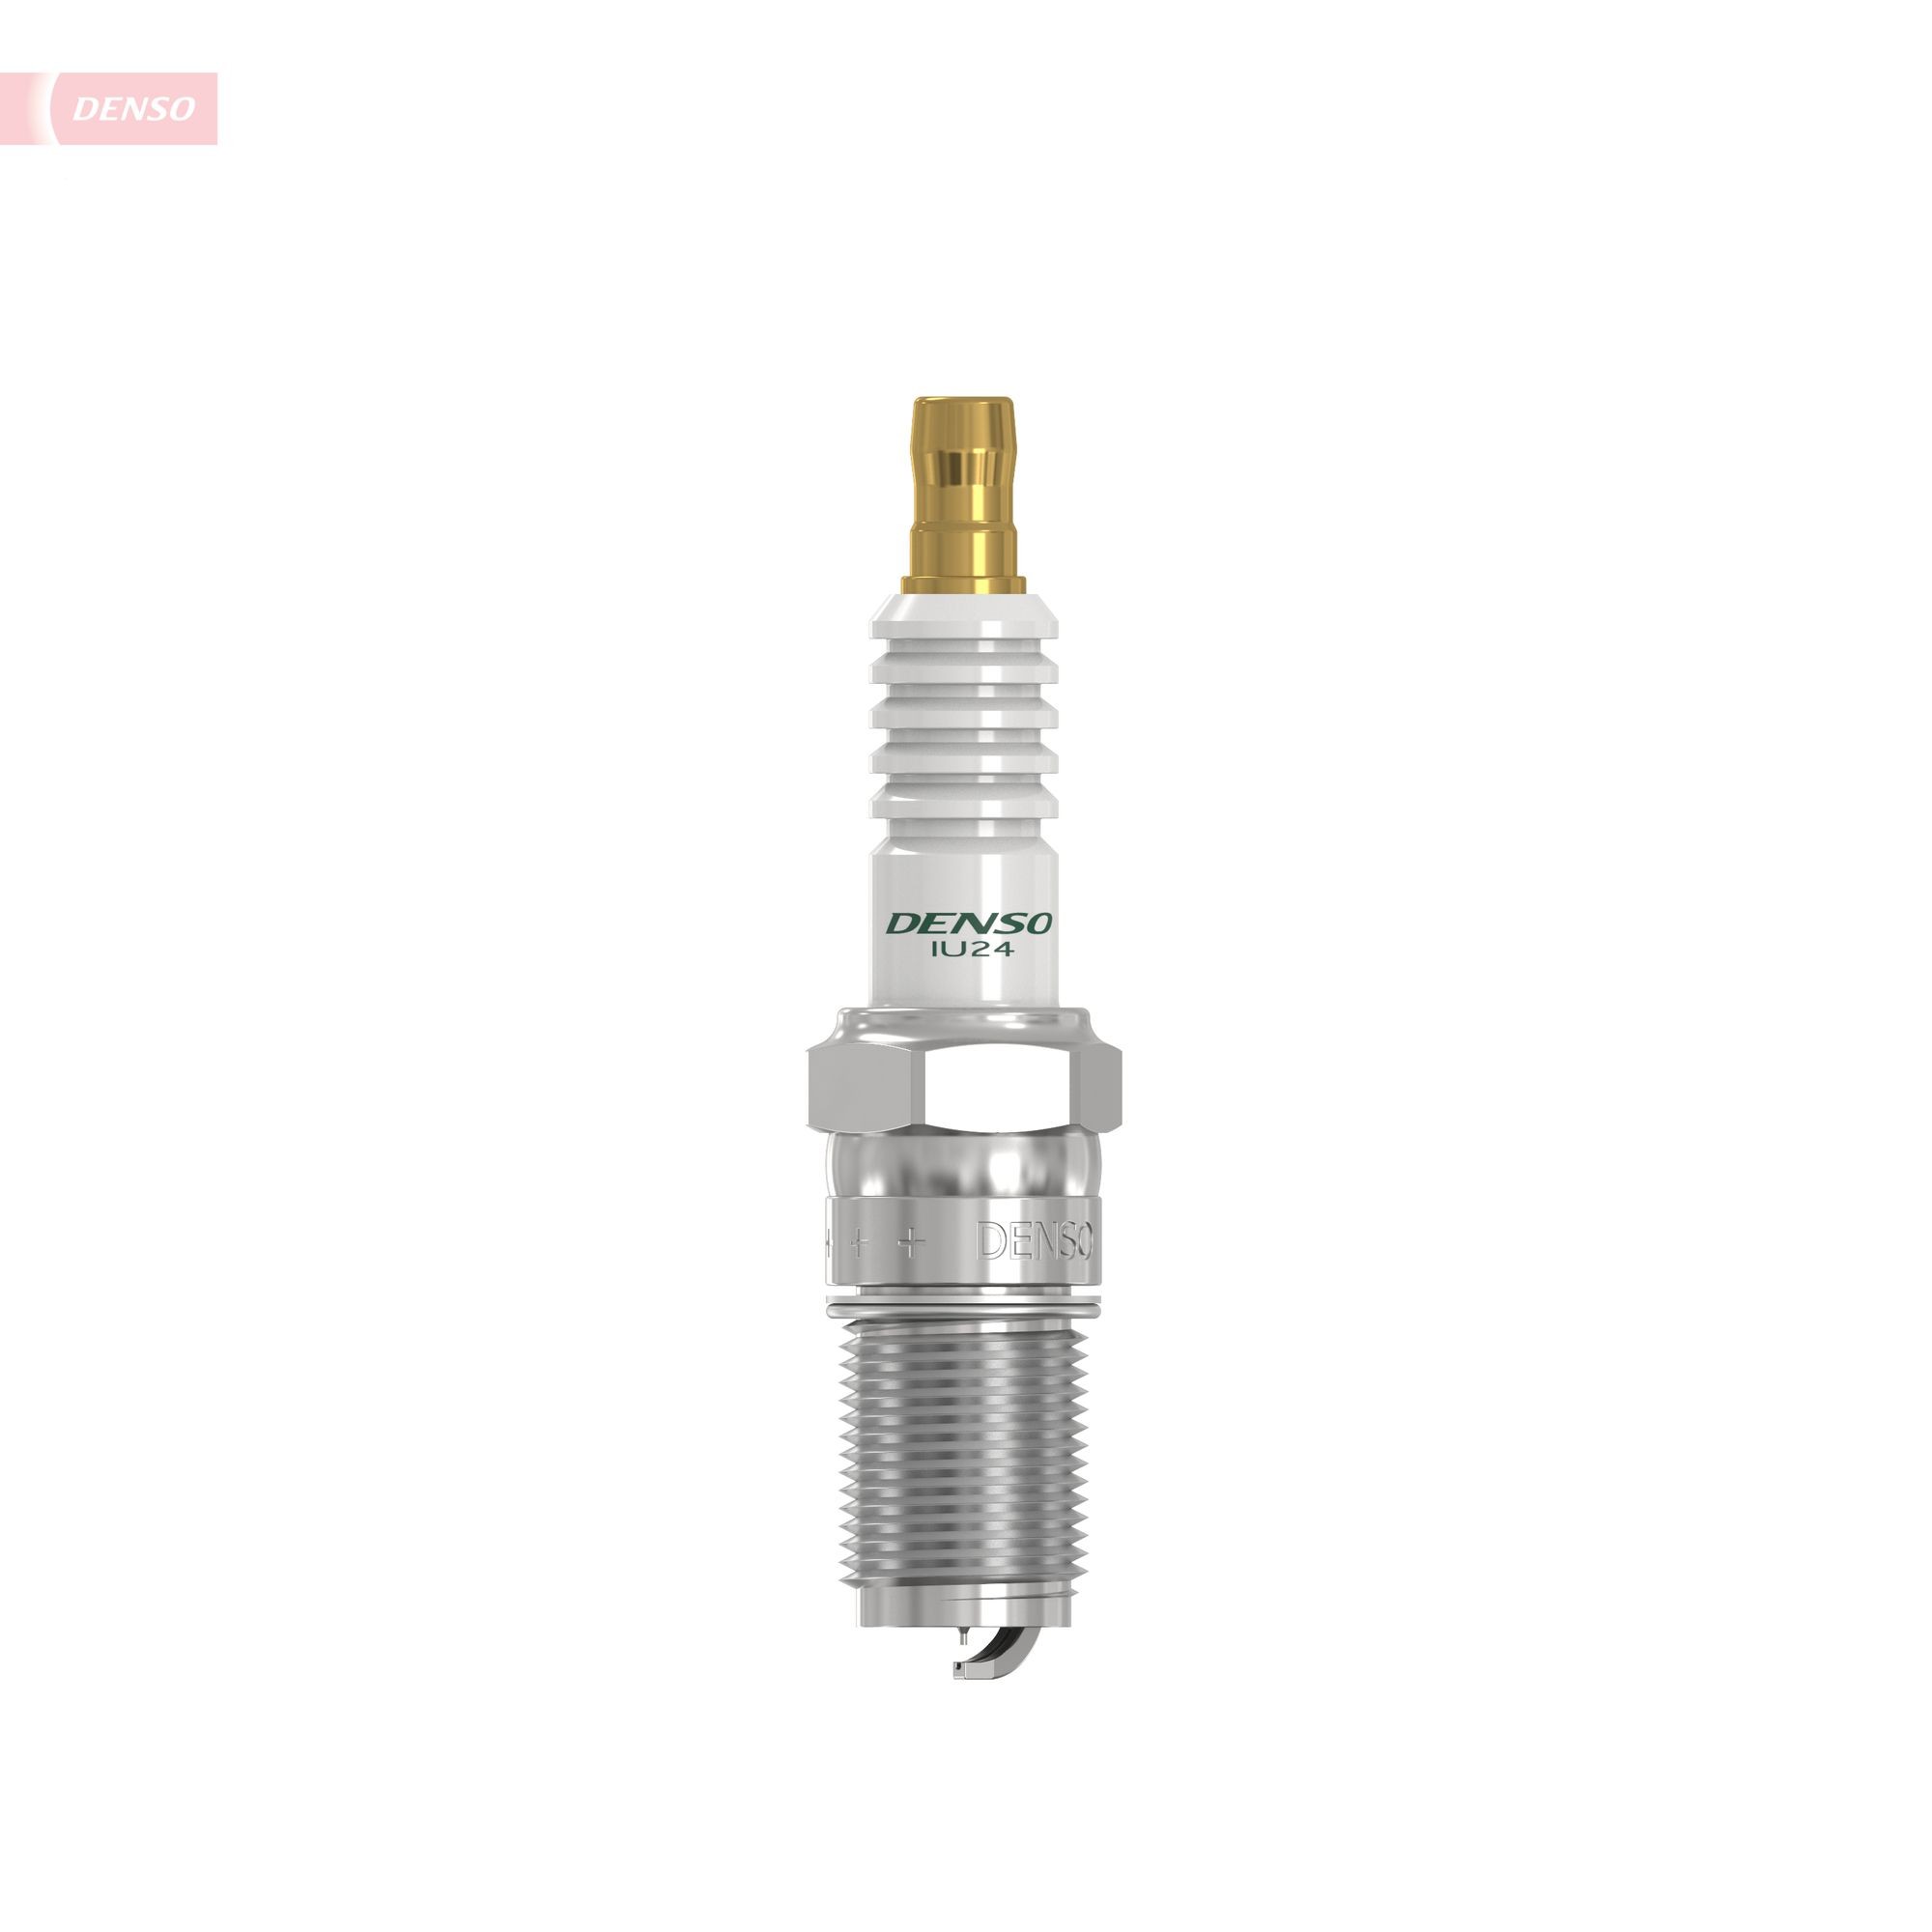 DENSO Spark plugs 5362 buy online